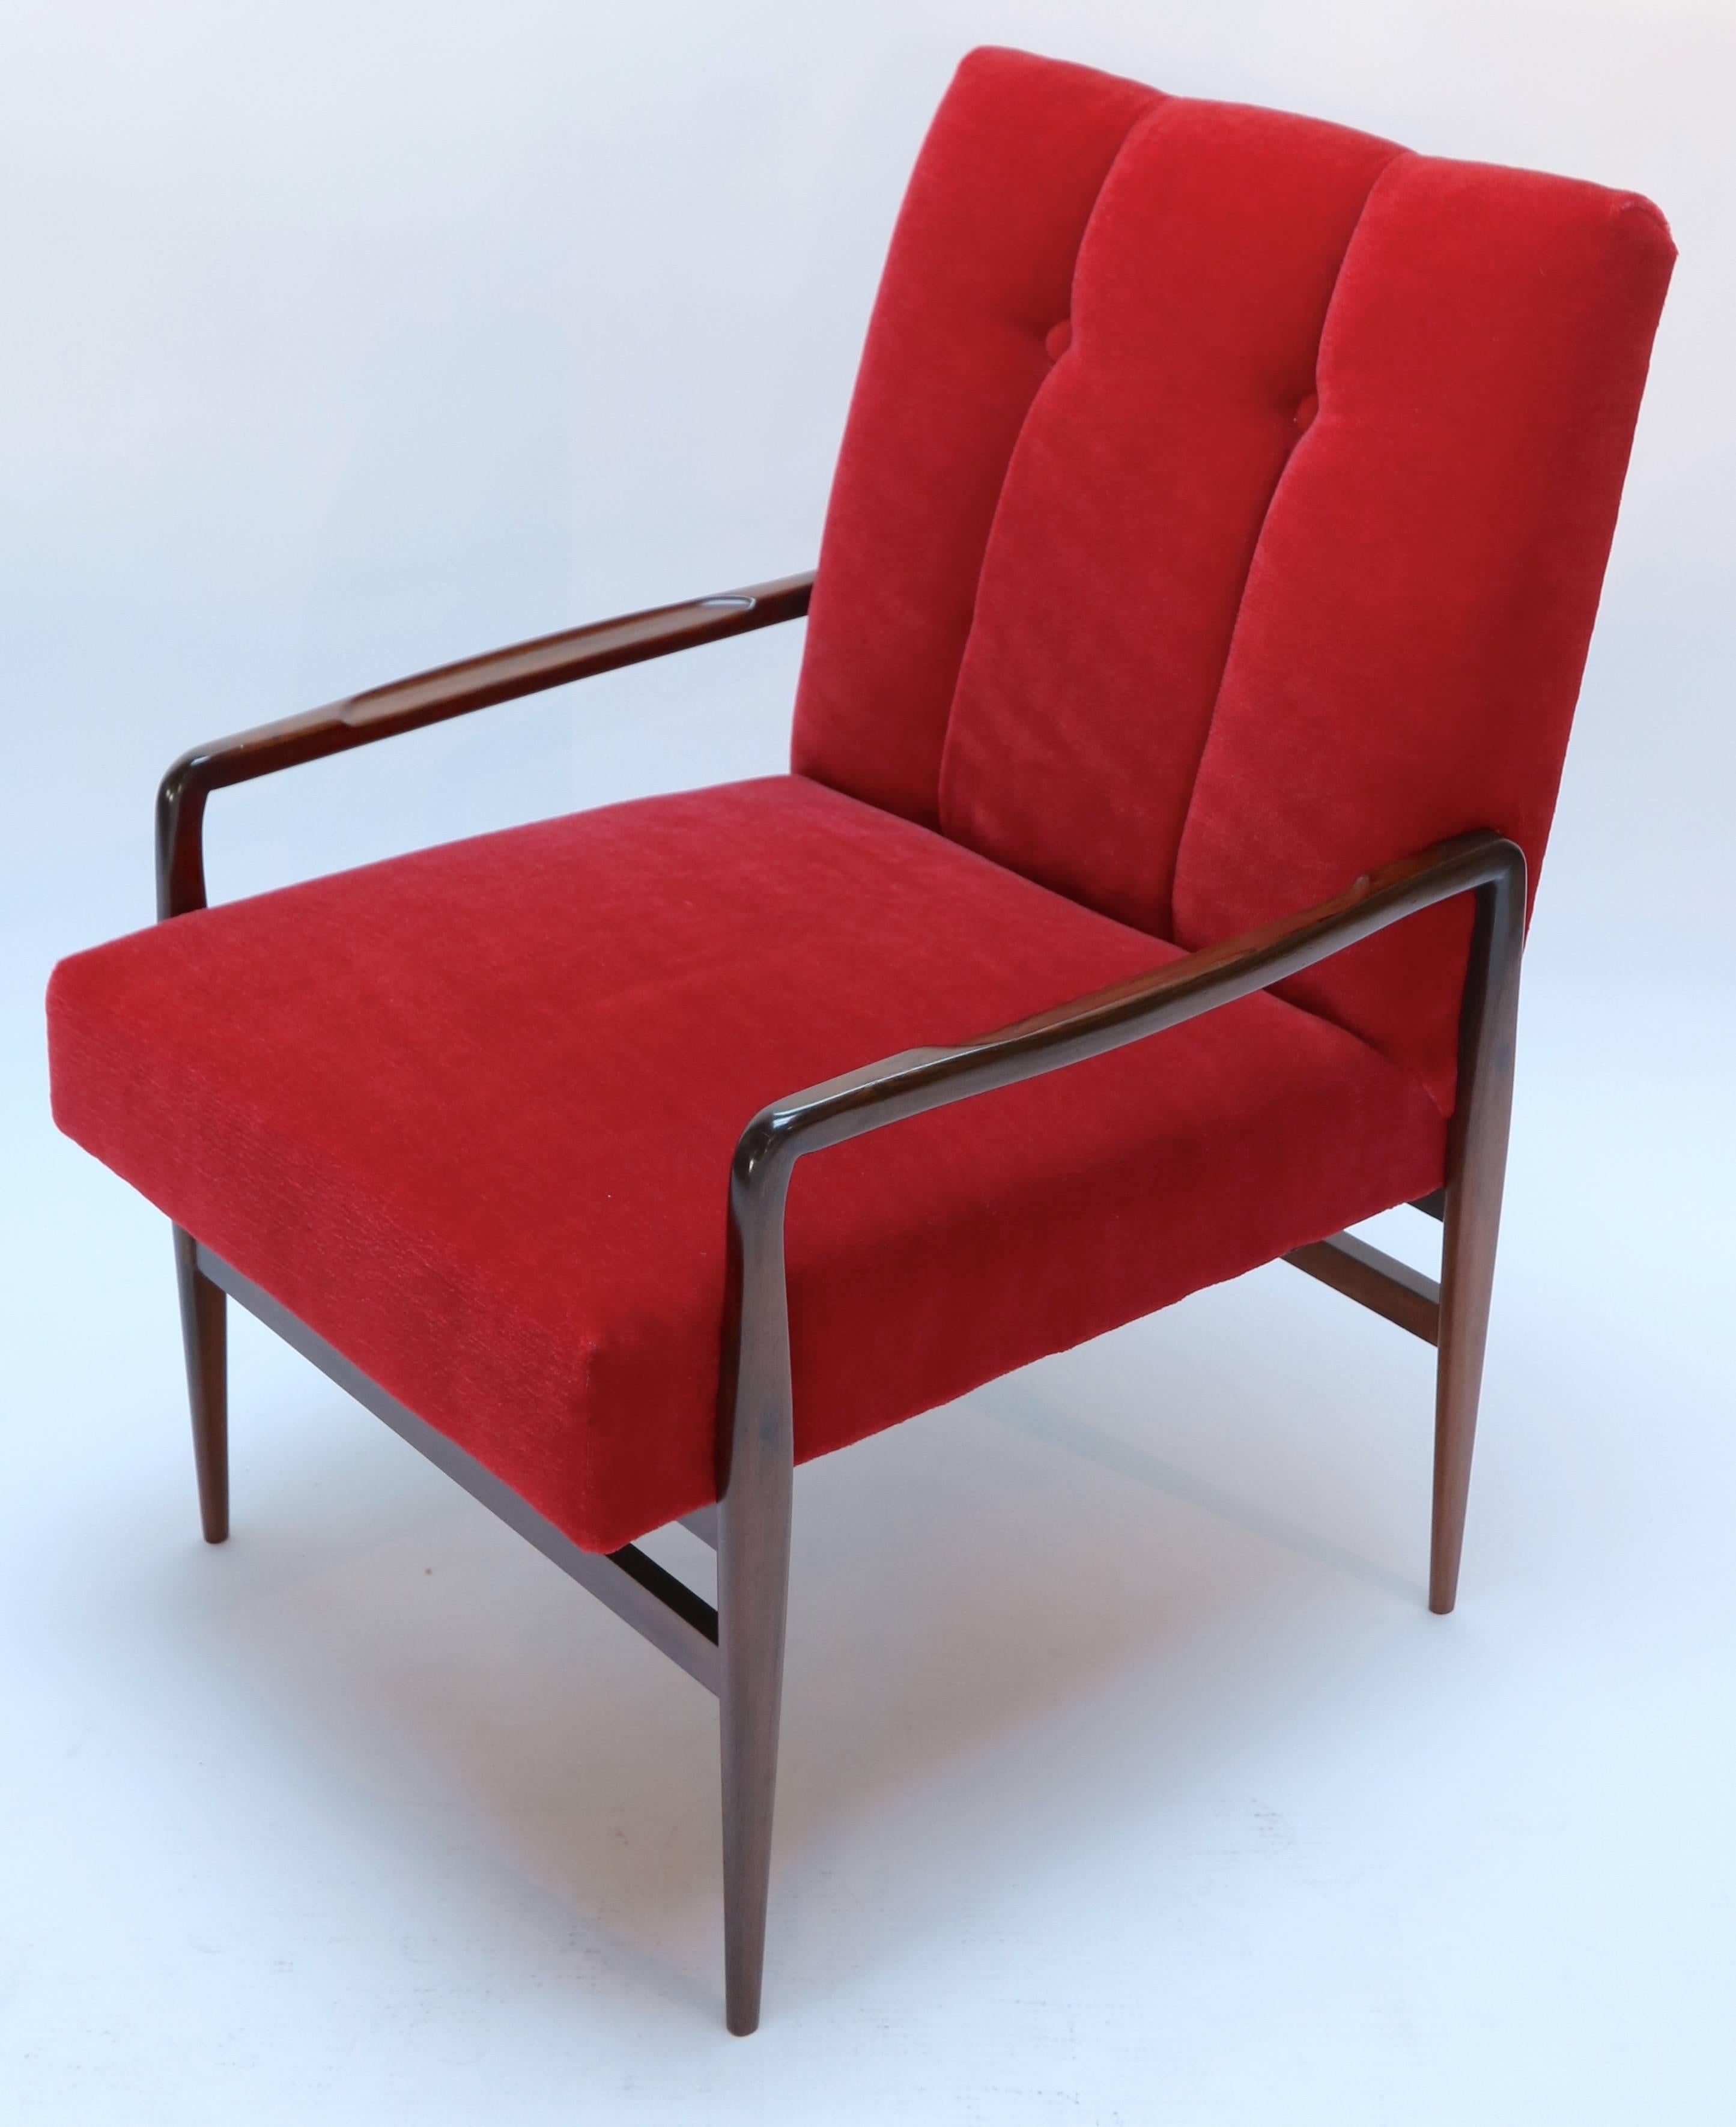 Pair of beautifully restored 1960s Brazilian jacaranda armchairs upholstered in red mohair.